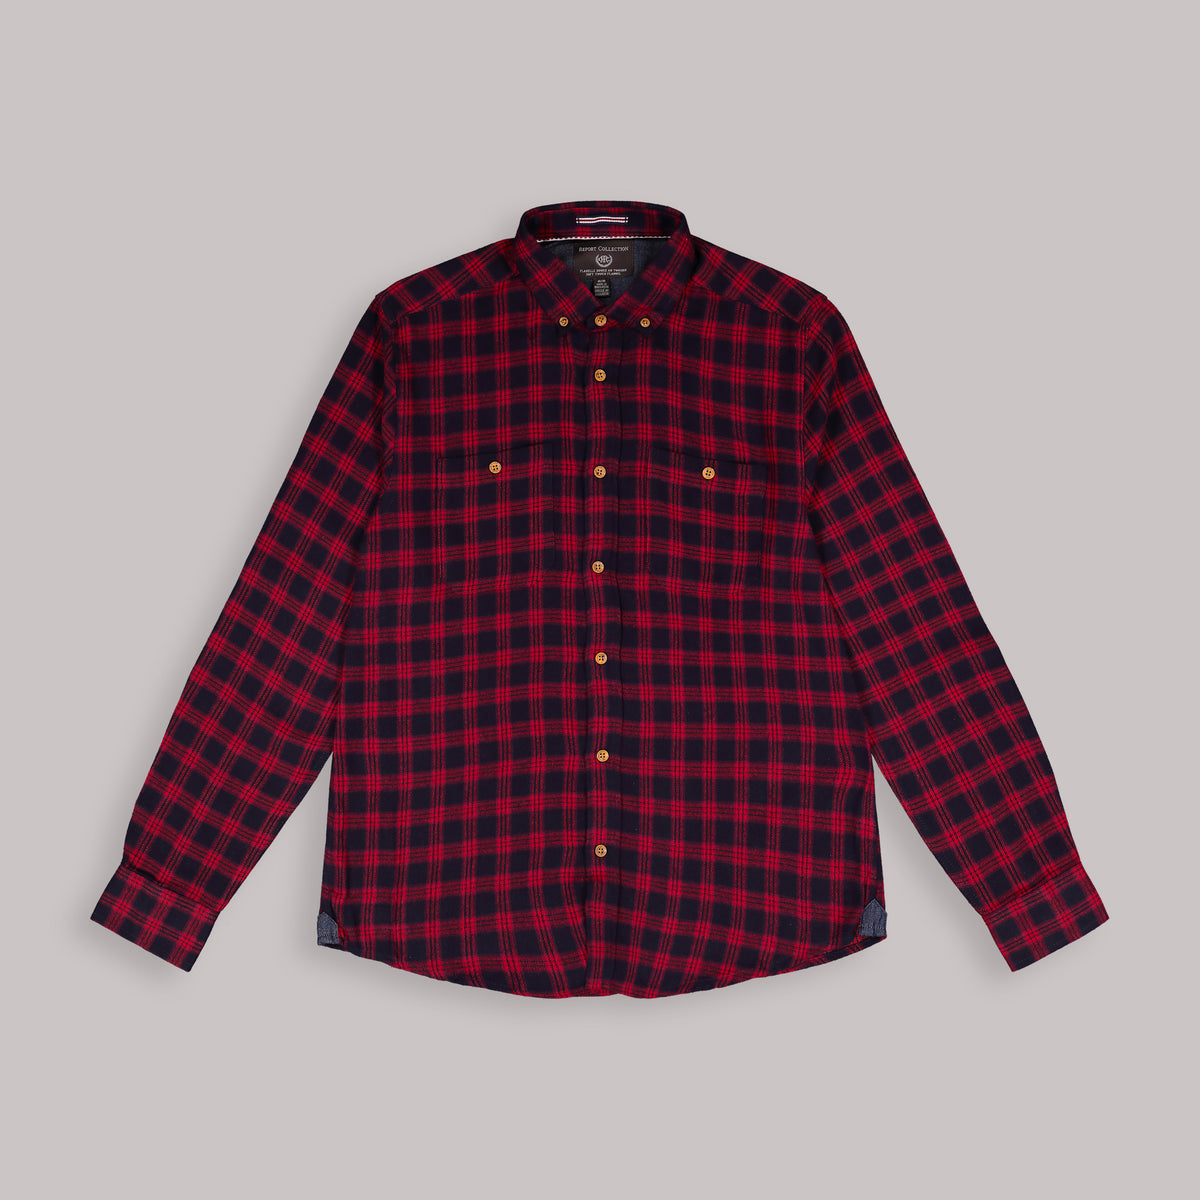 Long Sleeve Cotton Flannel Plaid Woven Sport Shirt in Red